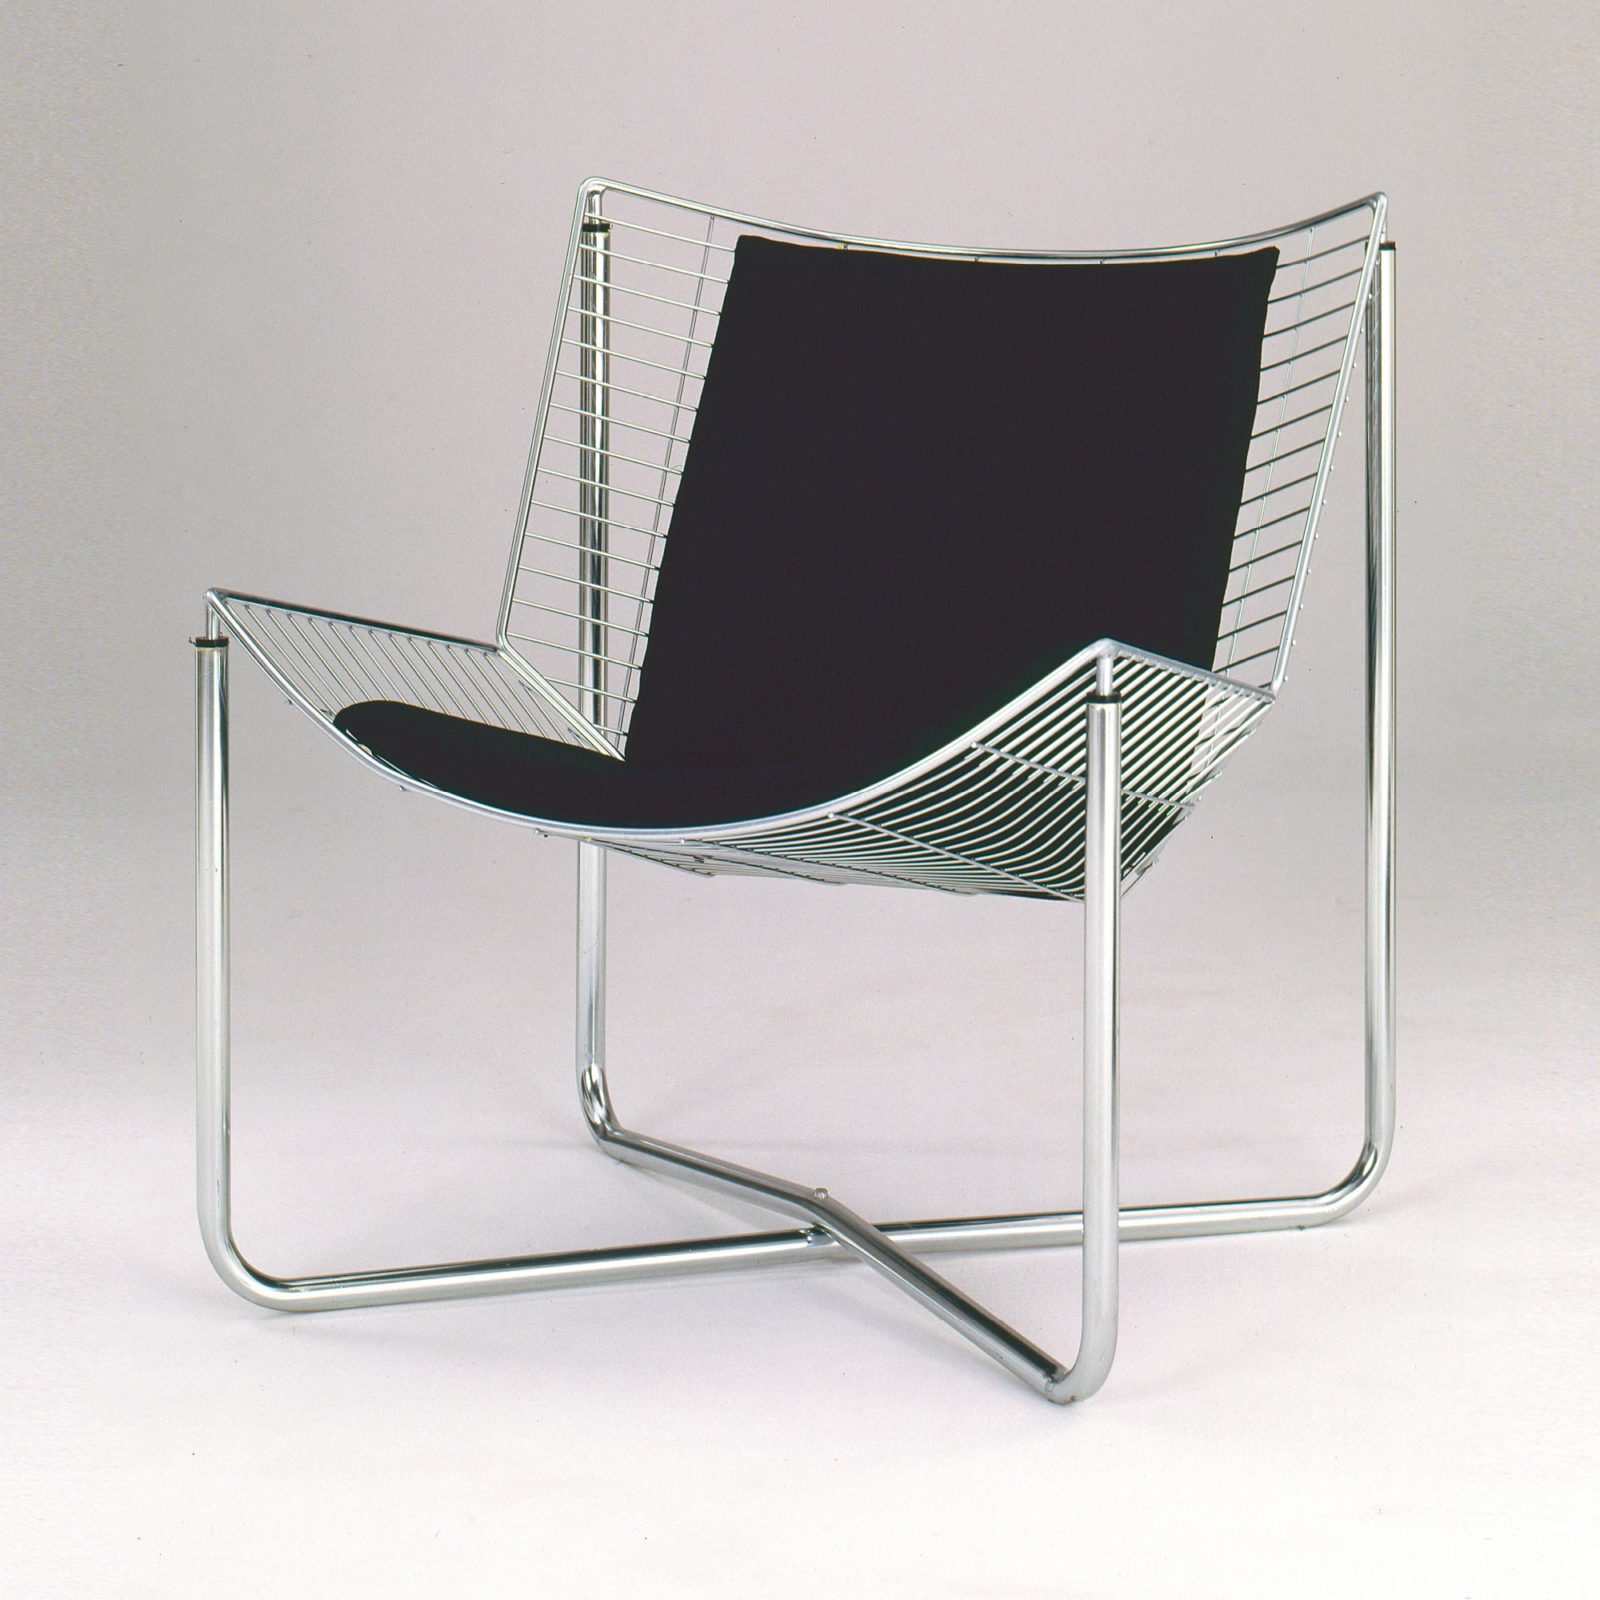 Easy chair made from metal wire frame, and black upholstery.